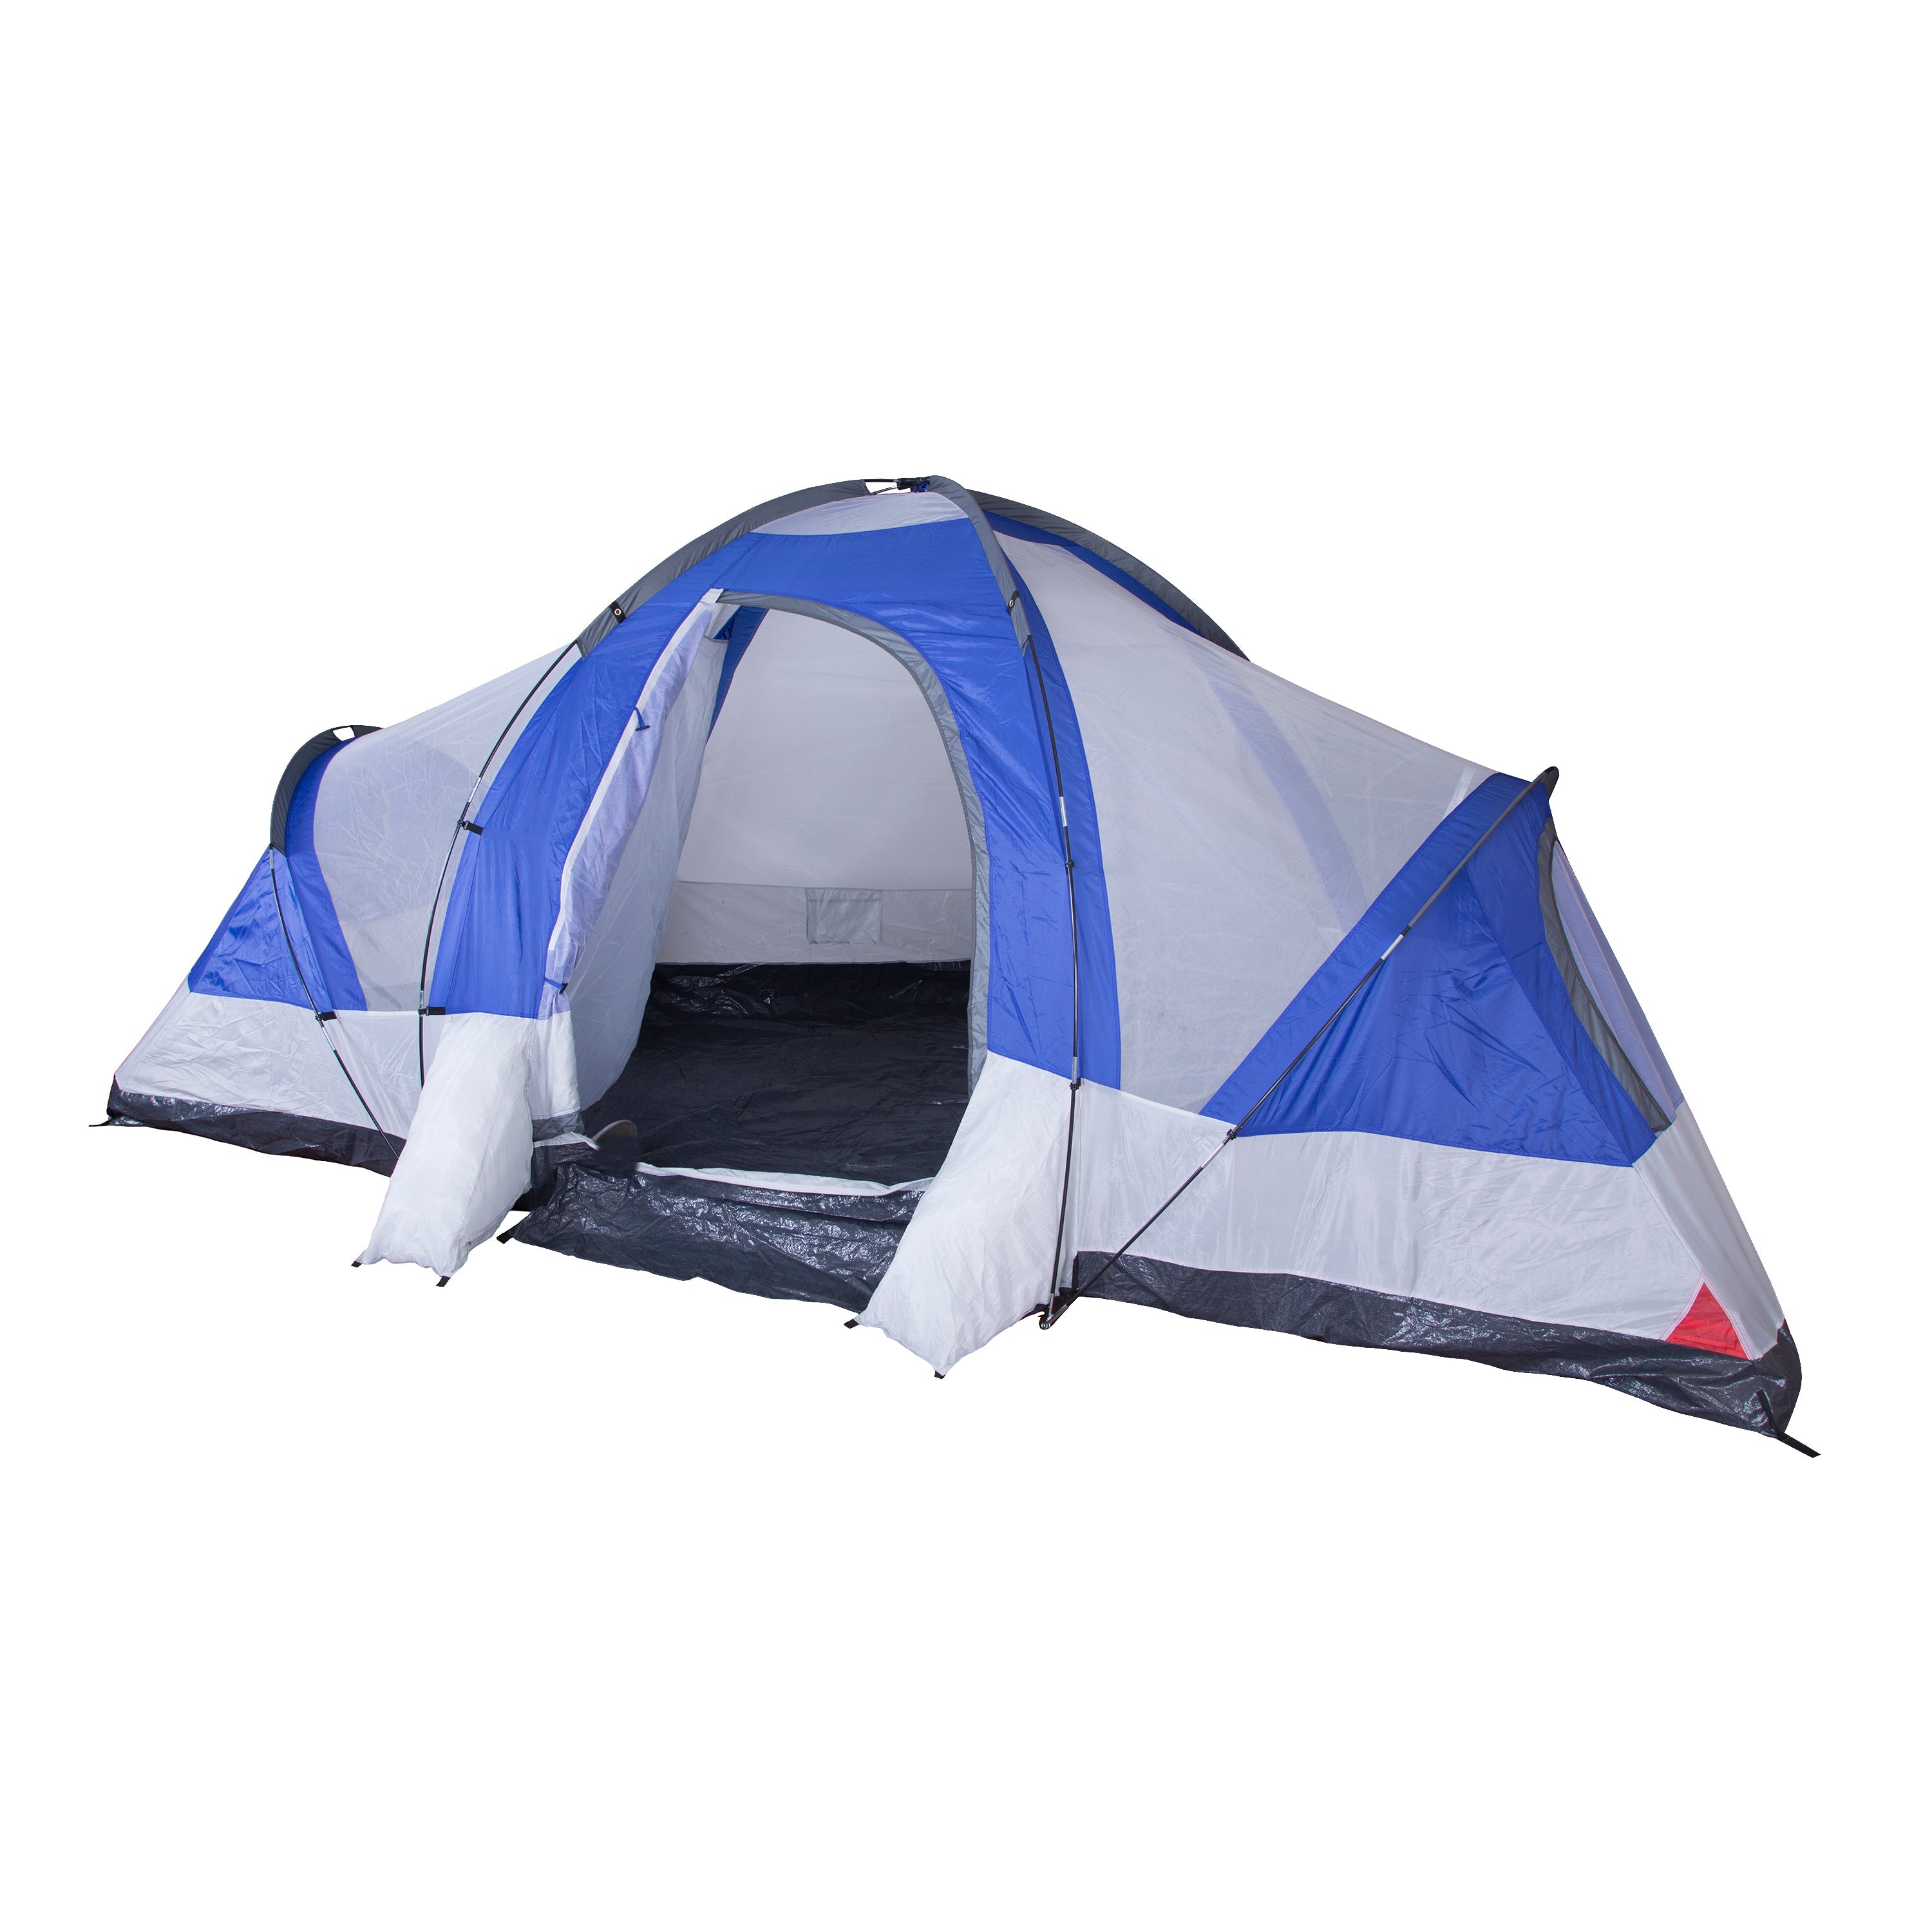 Grand 18 Family Tent - 3 Room - 10 Ft X 18 Ft X 72 Inch